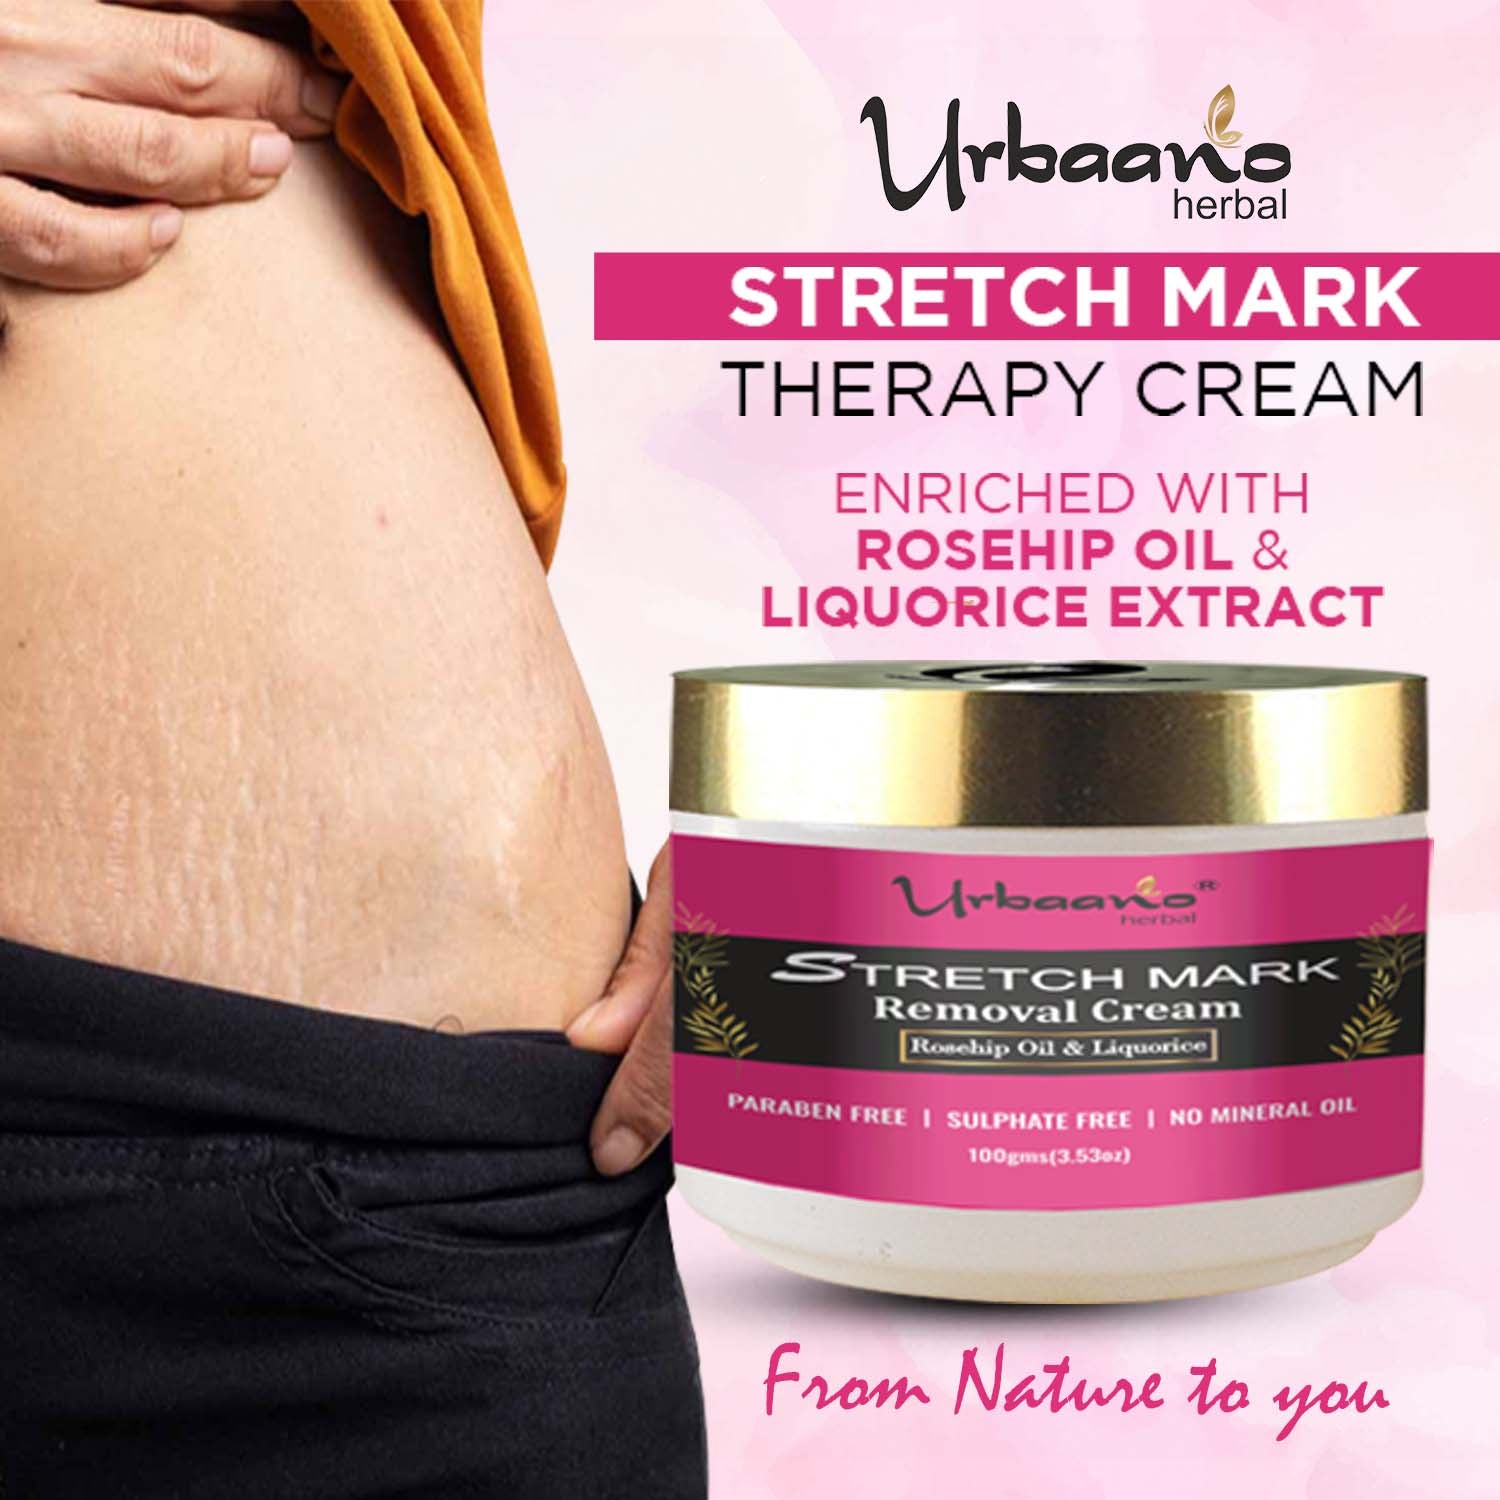 urbaano herbal stretch mark removal cream with rosehip, liquorice from nature to you